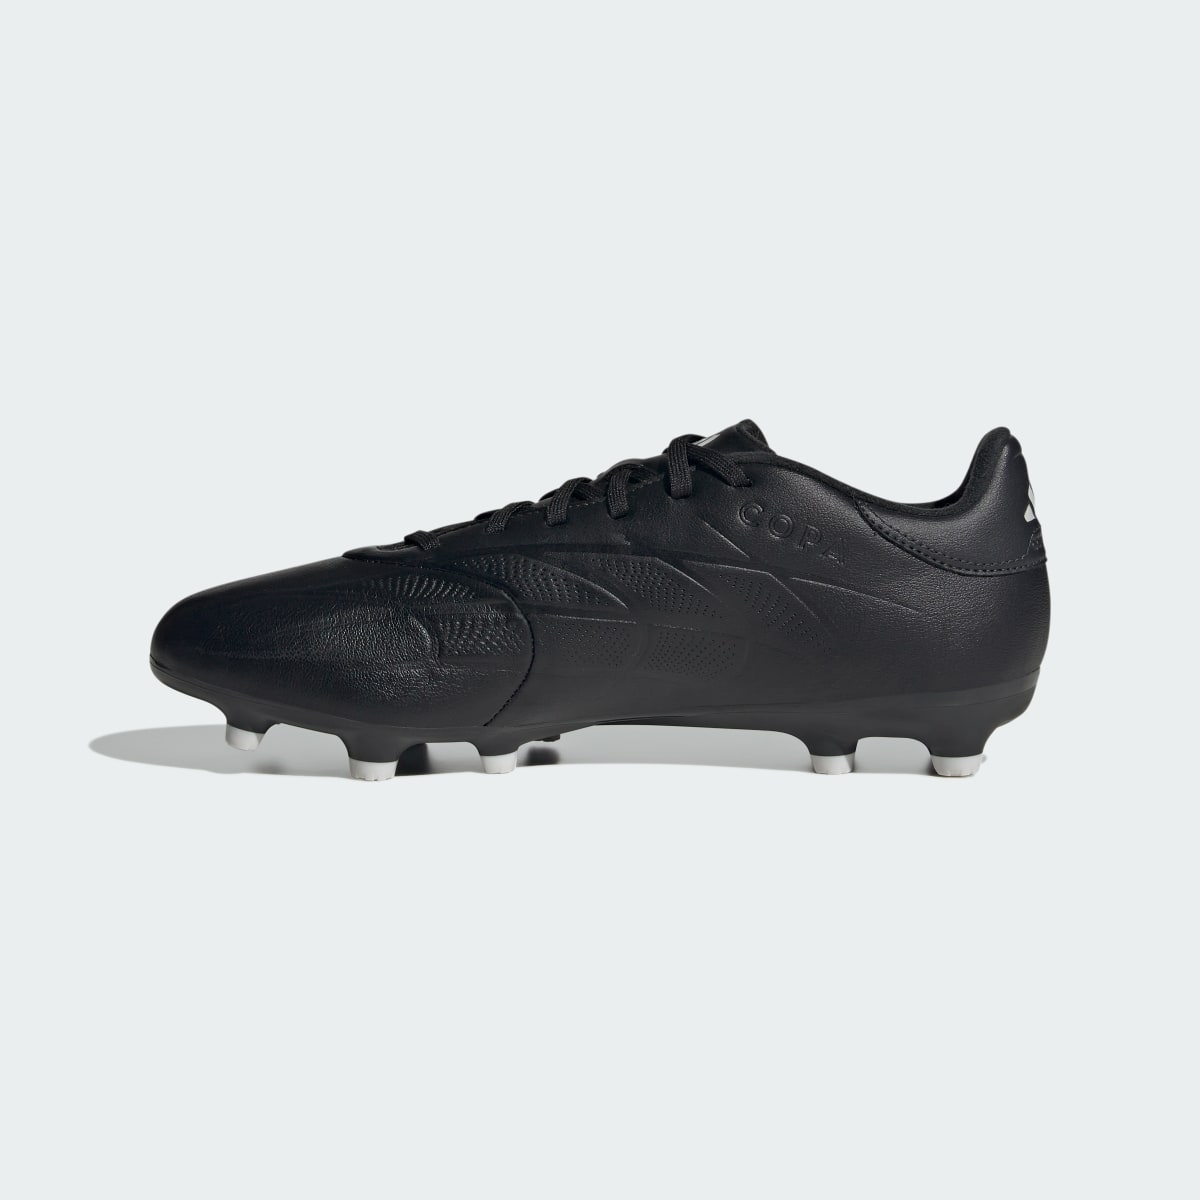 Adidas Copa Pure II League Firm Ground Boots. 7